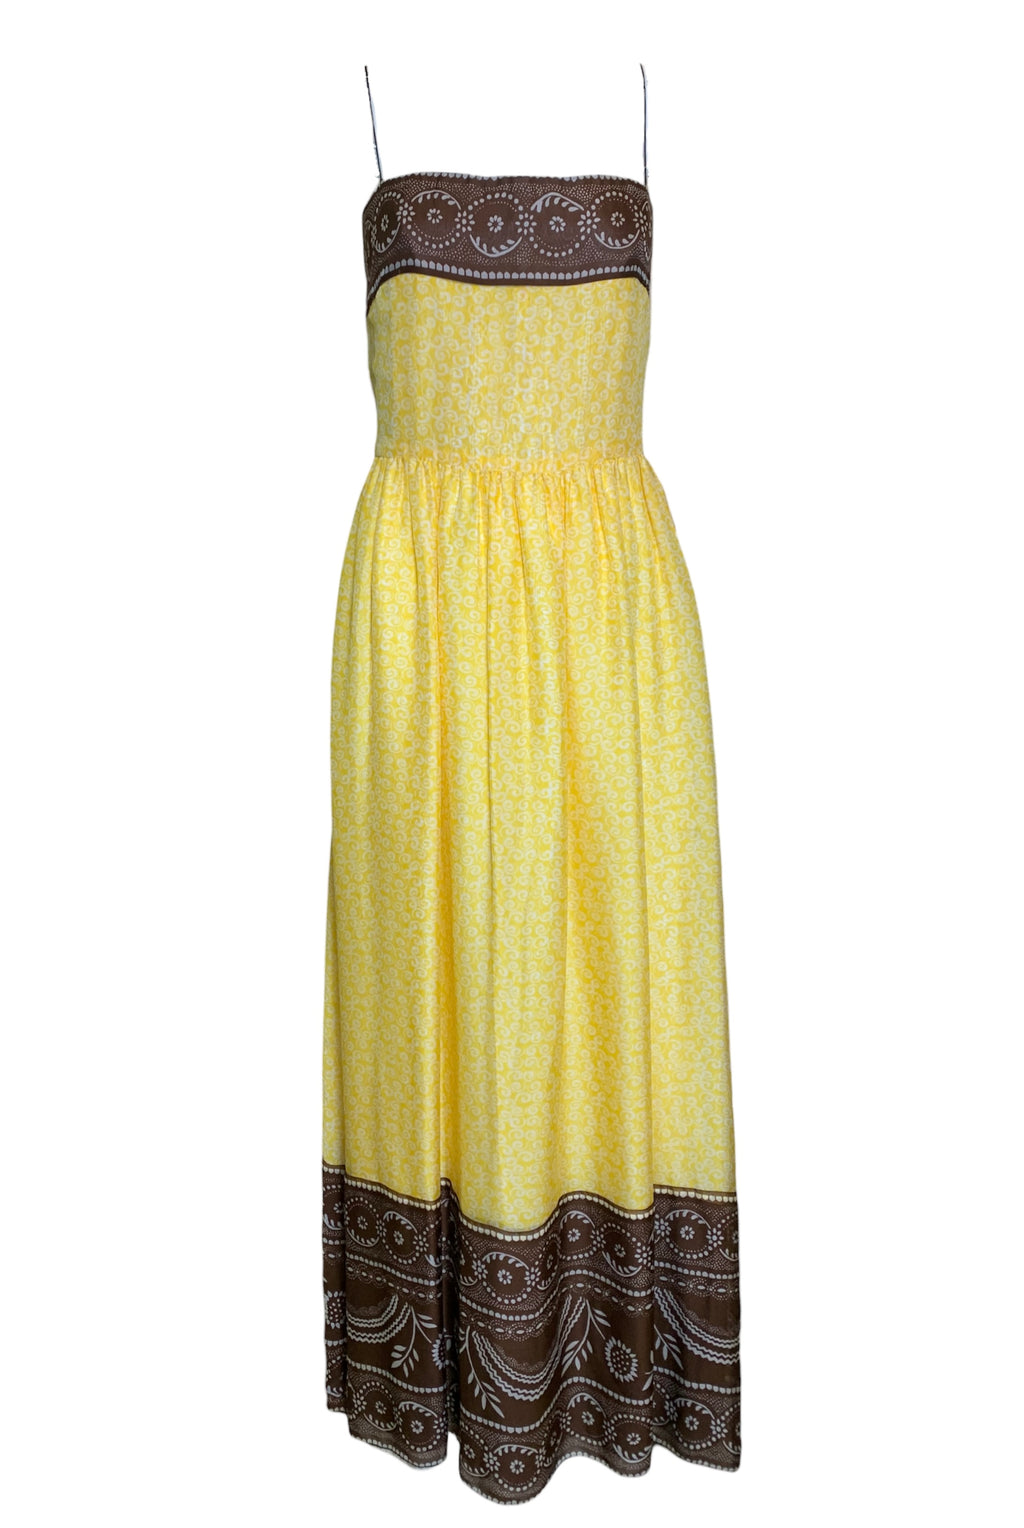  Oscar de la Renta 70s Yellow and White Print Silk Gown with Cocoa Trim FRONT 1 of 5